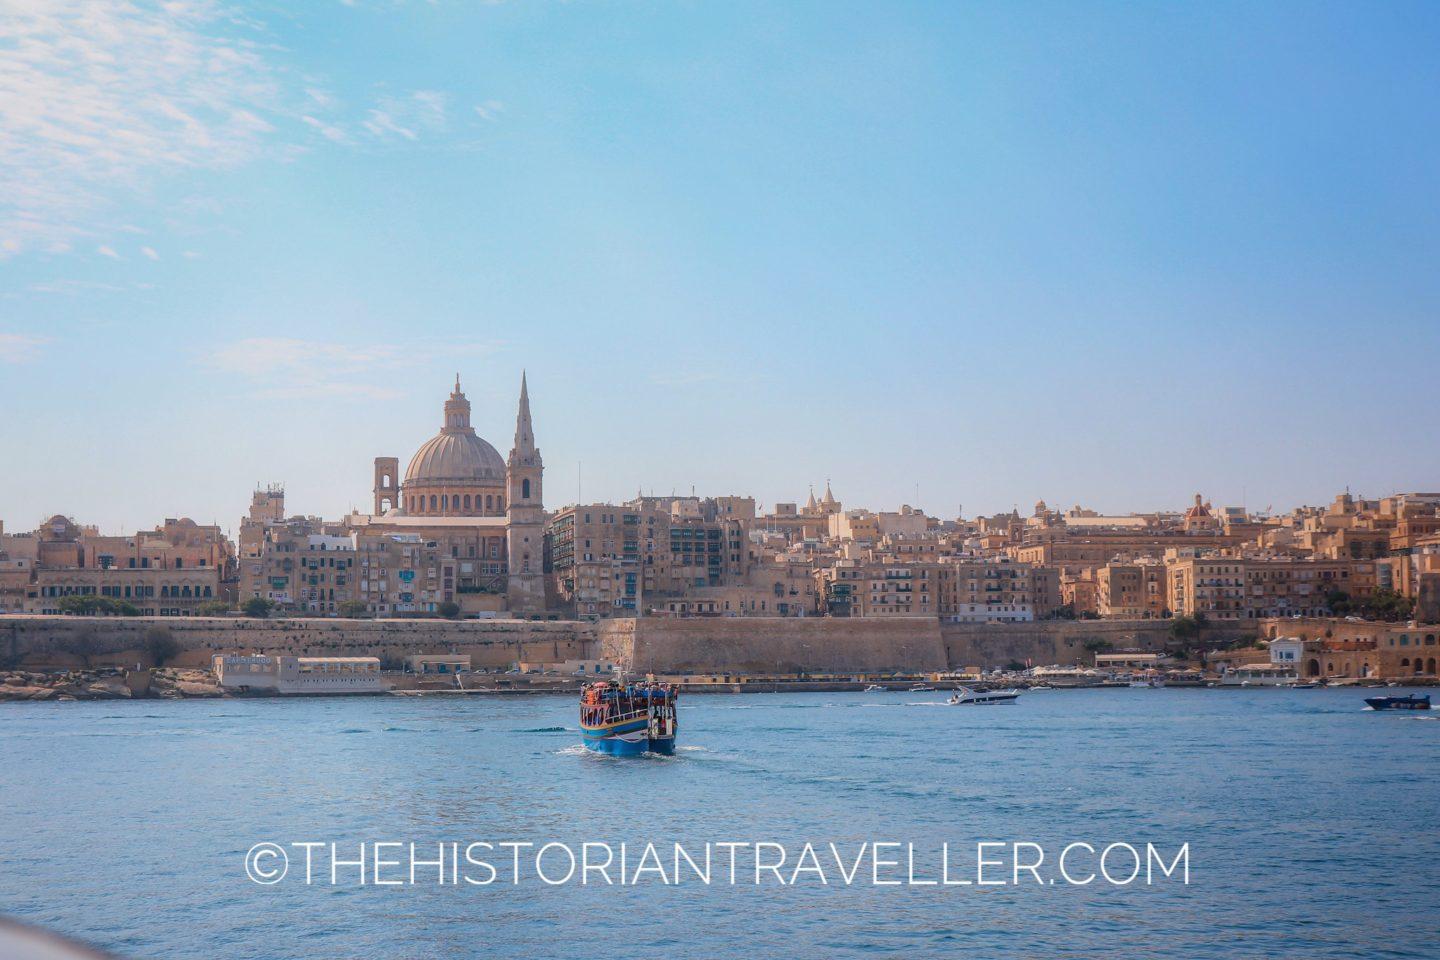 View of Valletta from the Cruise boat